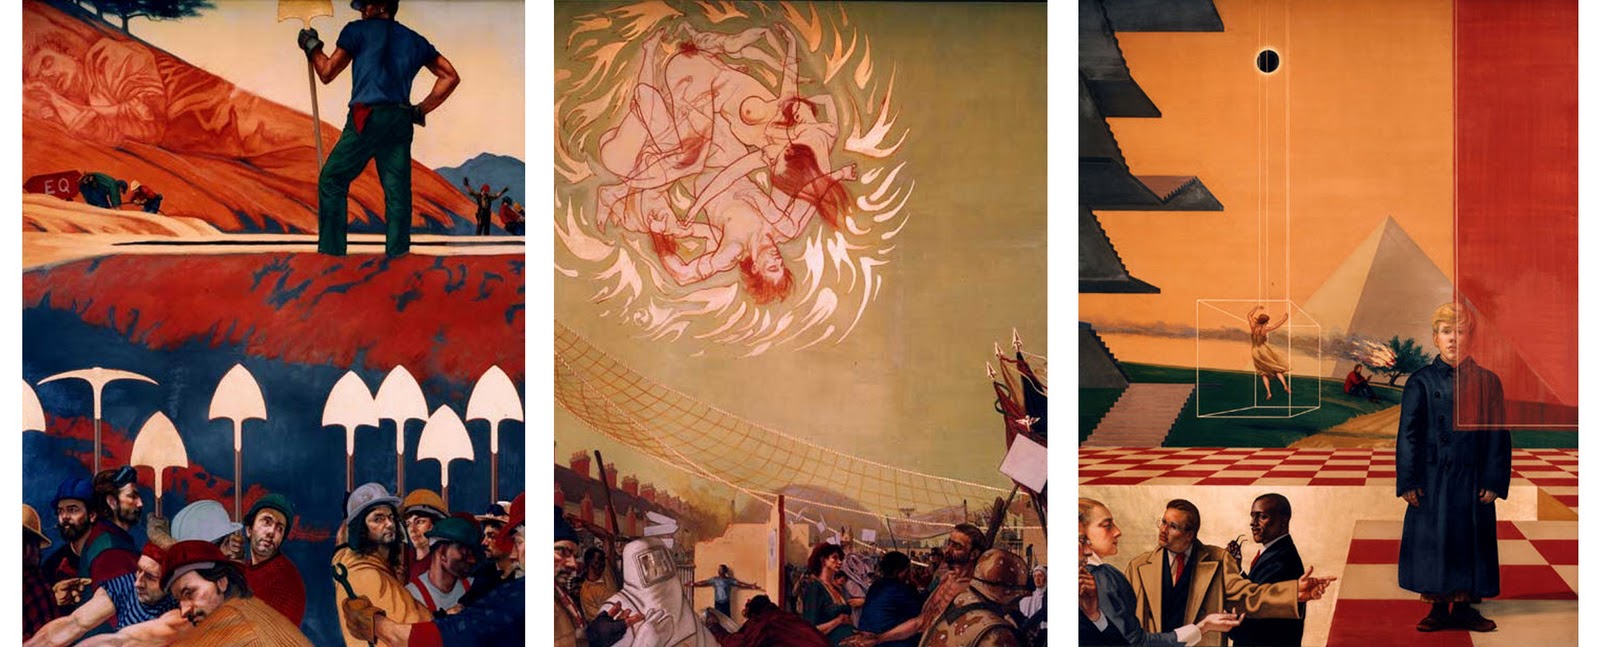 Ben Long Mural "Order Out of Chaos": How the Elite's Plans Were Foretold in Popular Culture